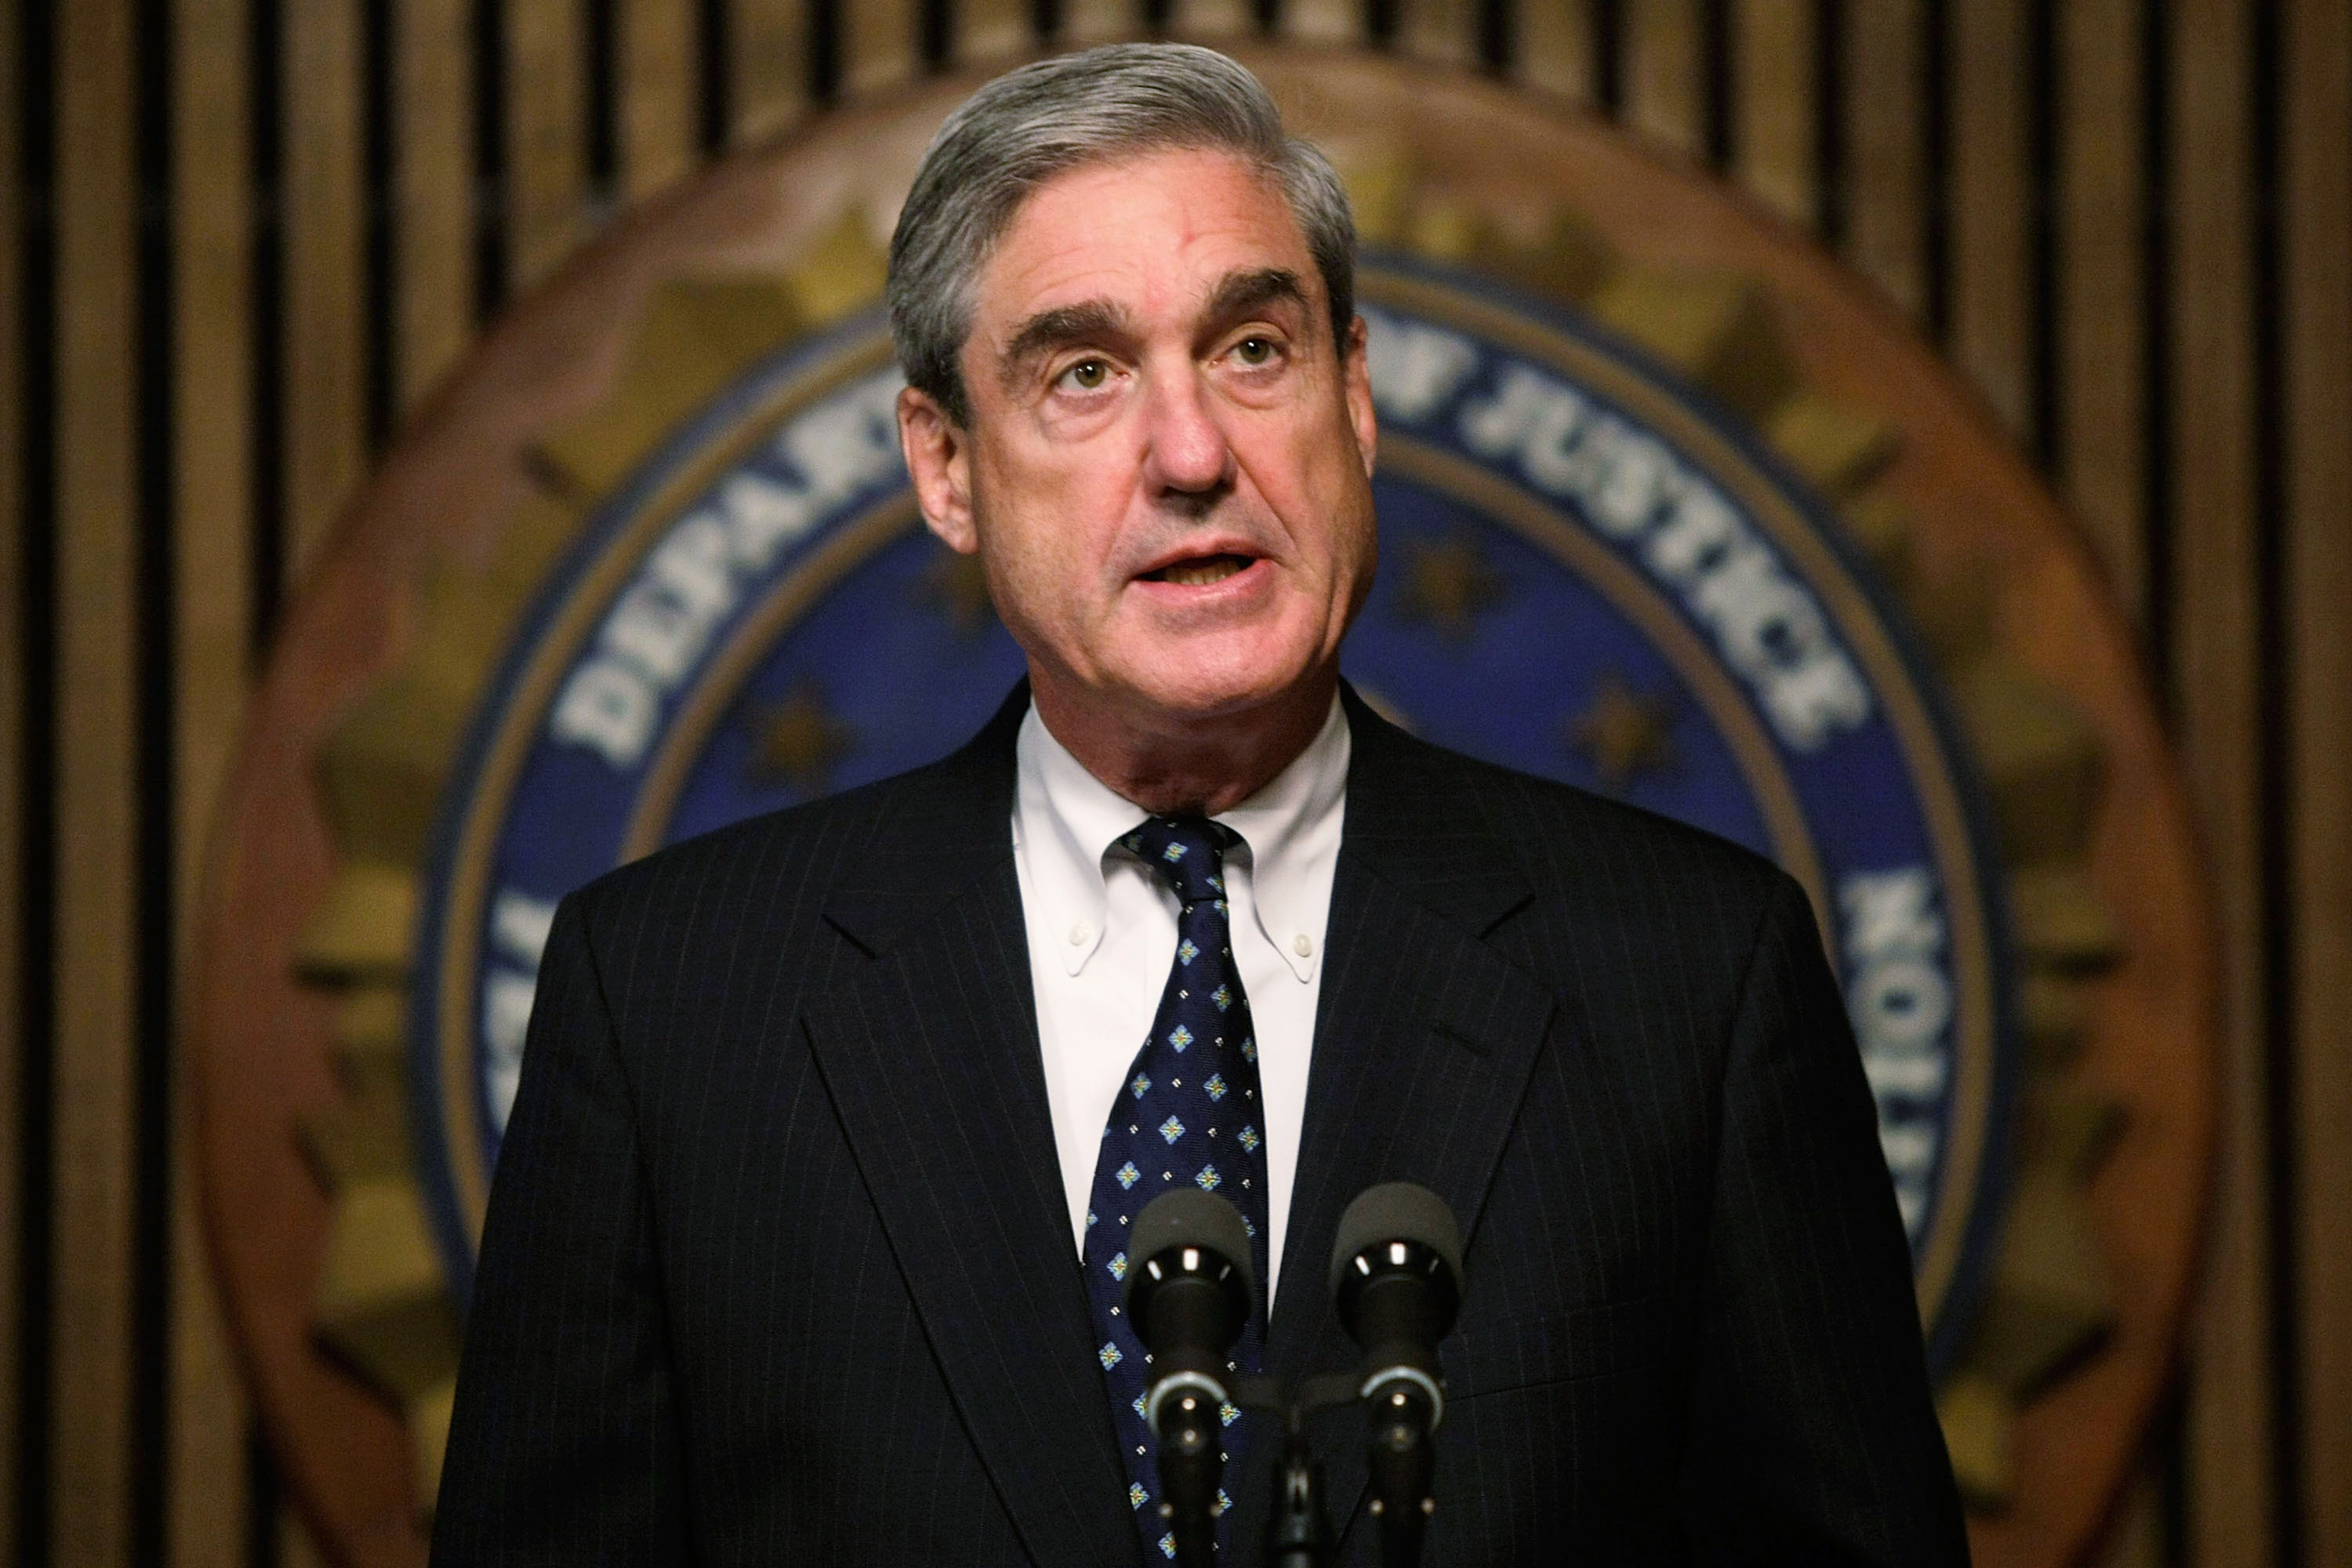 WASHINGTON - JUNE 25:  FBI Director Robert Mueller speaks during a news conference at the FBI headquarters June 25, 2008 in Washington, DC. The news conference was to mark the 5th anniversary of Innocence Lost initiative.  (Photo by Alex Wong/Getty Images)